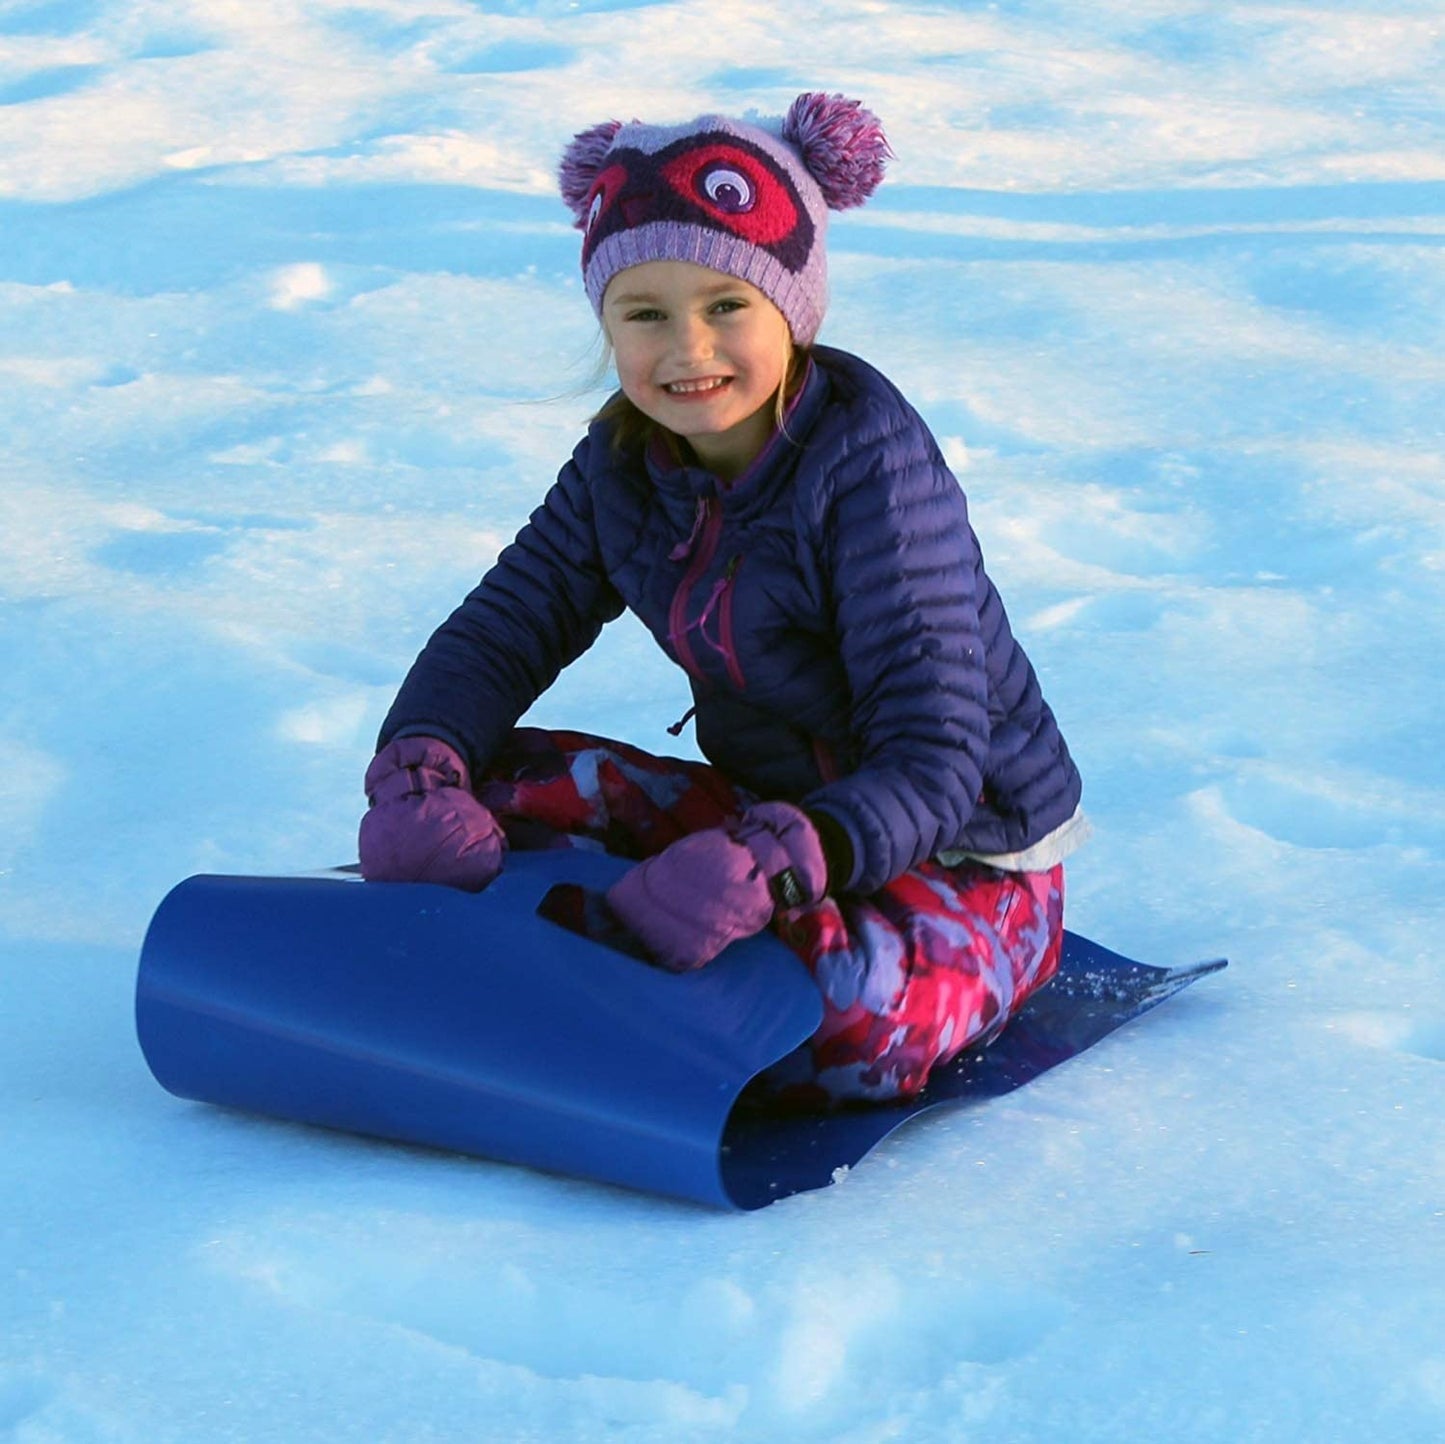 Snow Sledge Toboggans Sleigh Sled, Heavy Duty Plastic, Snow Ice Play Winter Toys with Handles for Kids and Adults, Highlands Sledding Toboggan Roll Up Carpet Sledge Sledges & Toboggans Kids